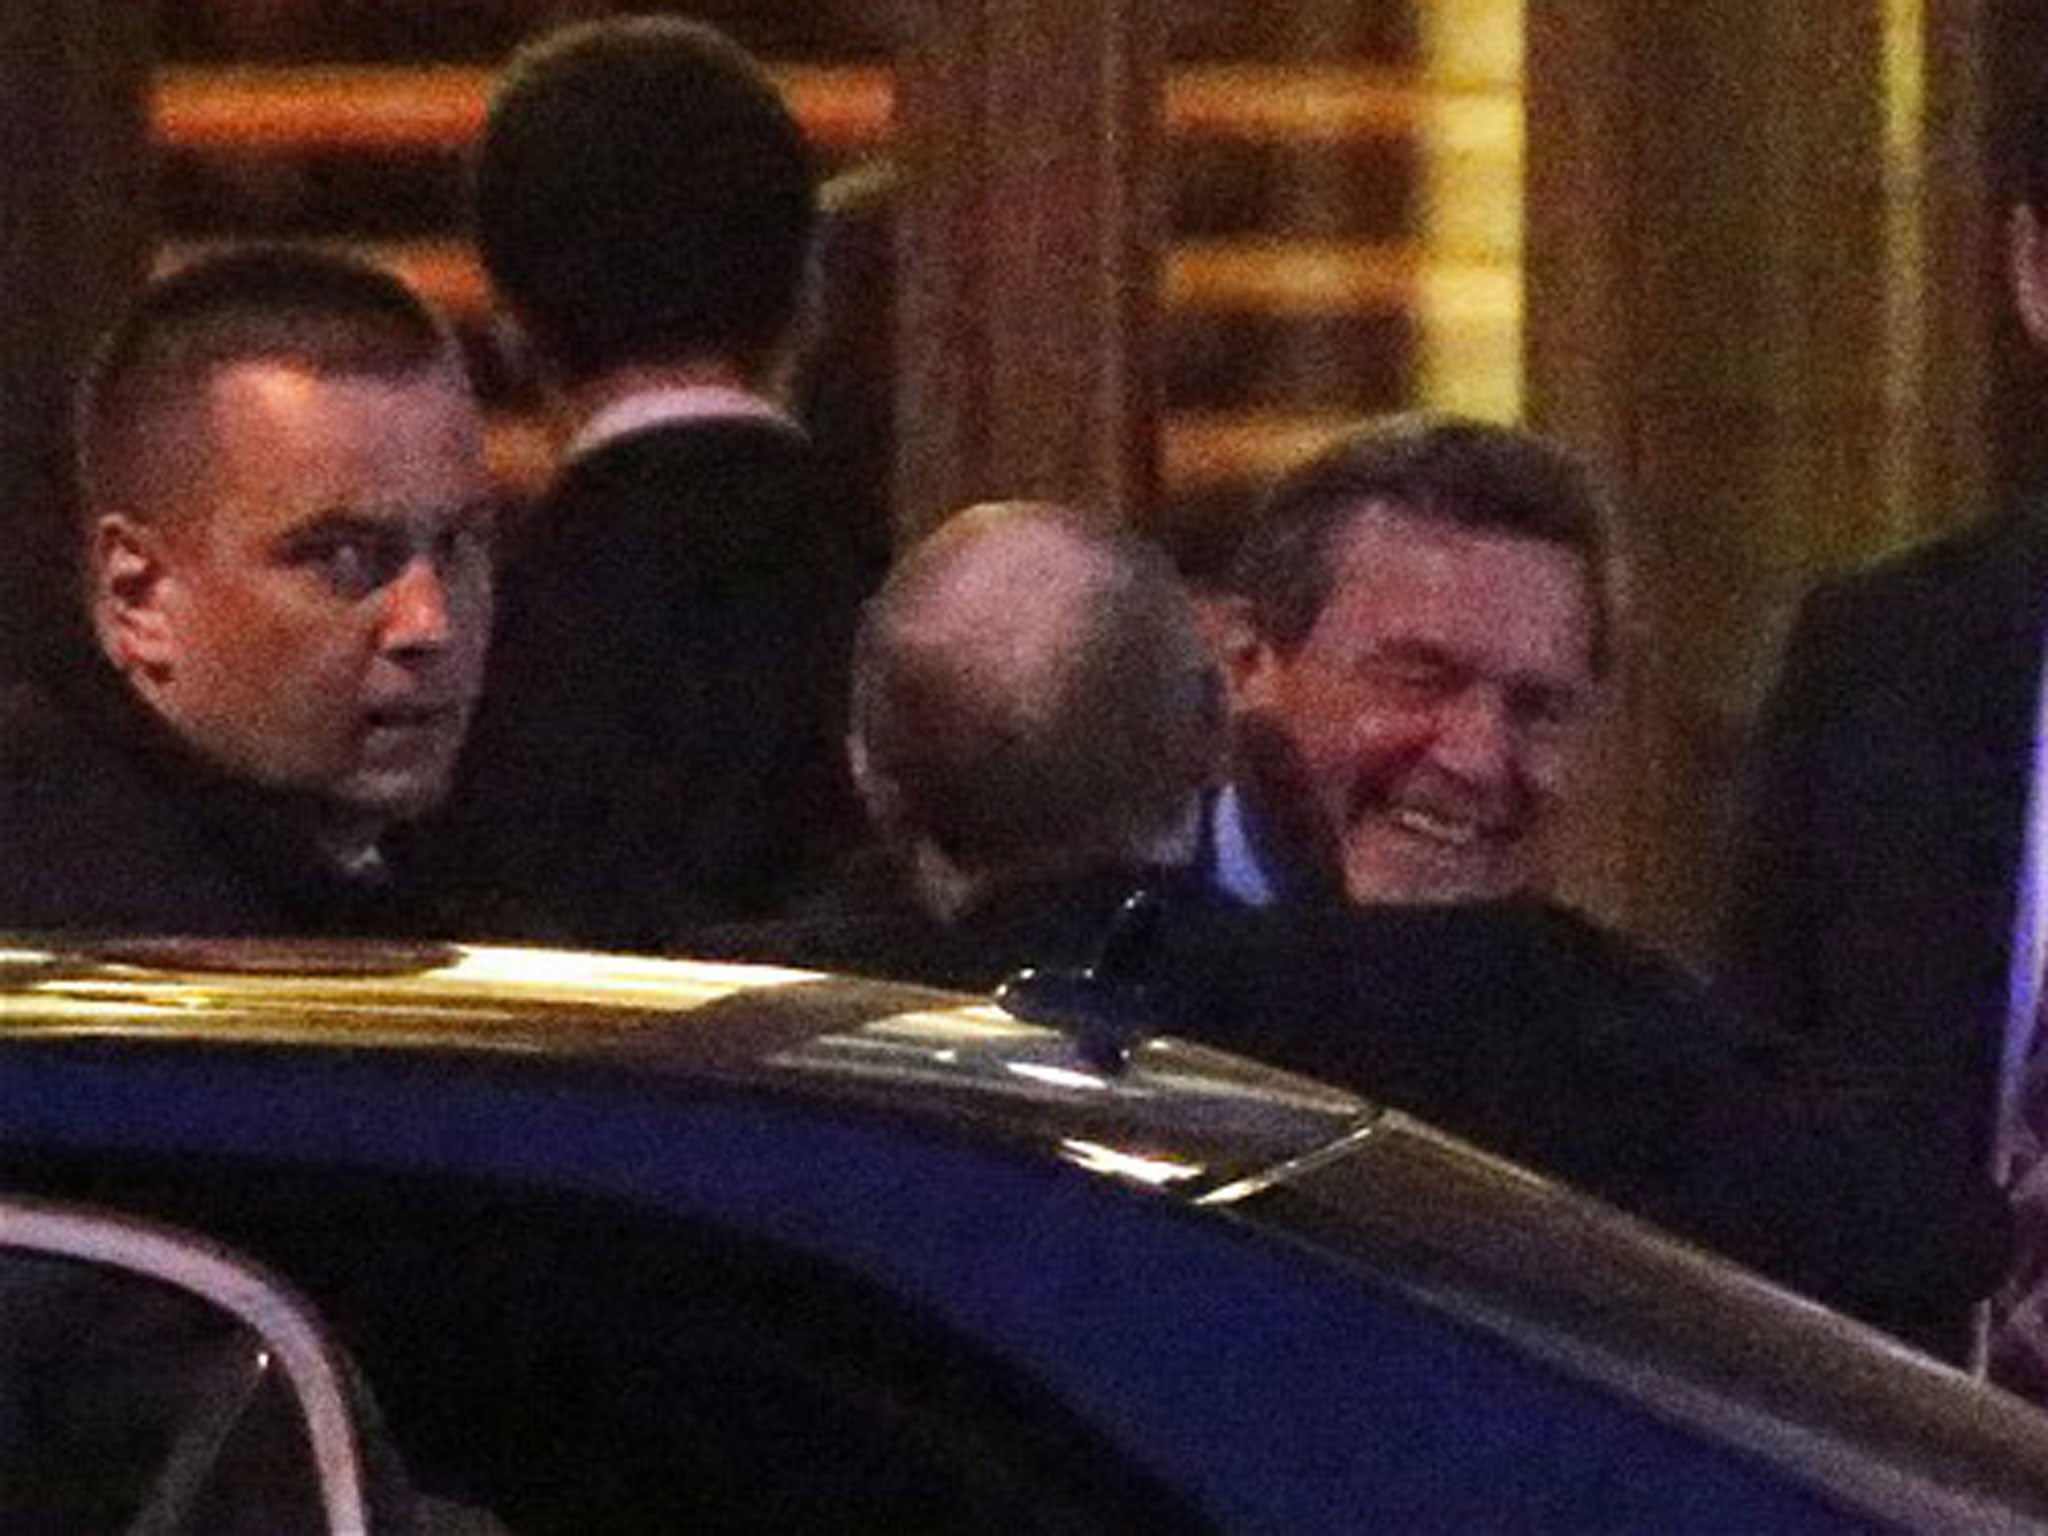 Putin and Schroeder embrace in pictures reportedly taken at a 70th birthday party